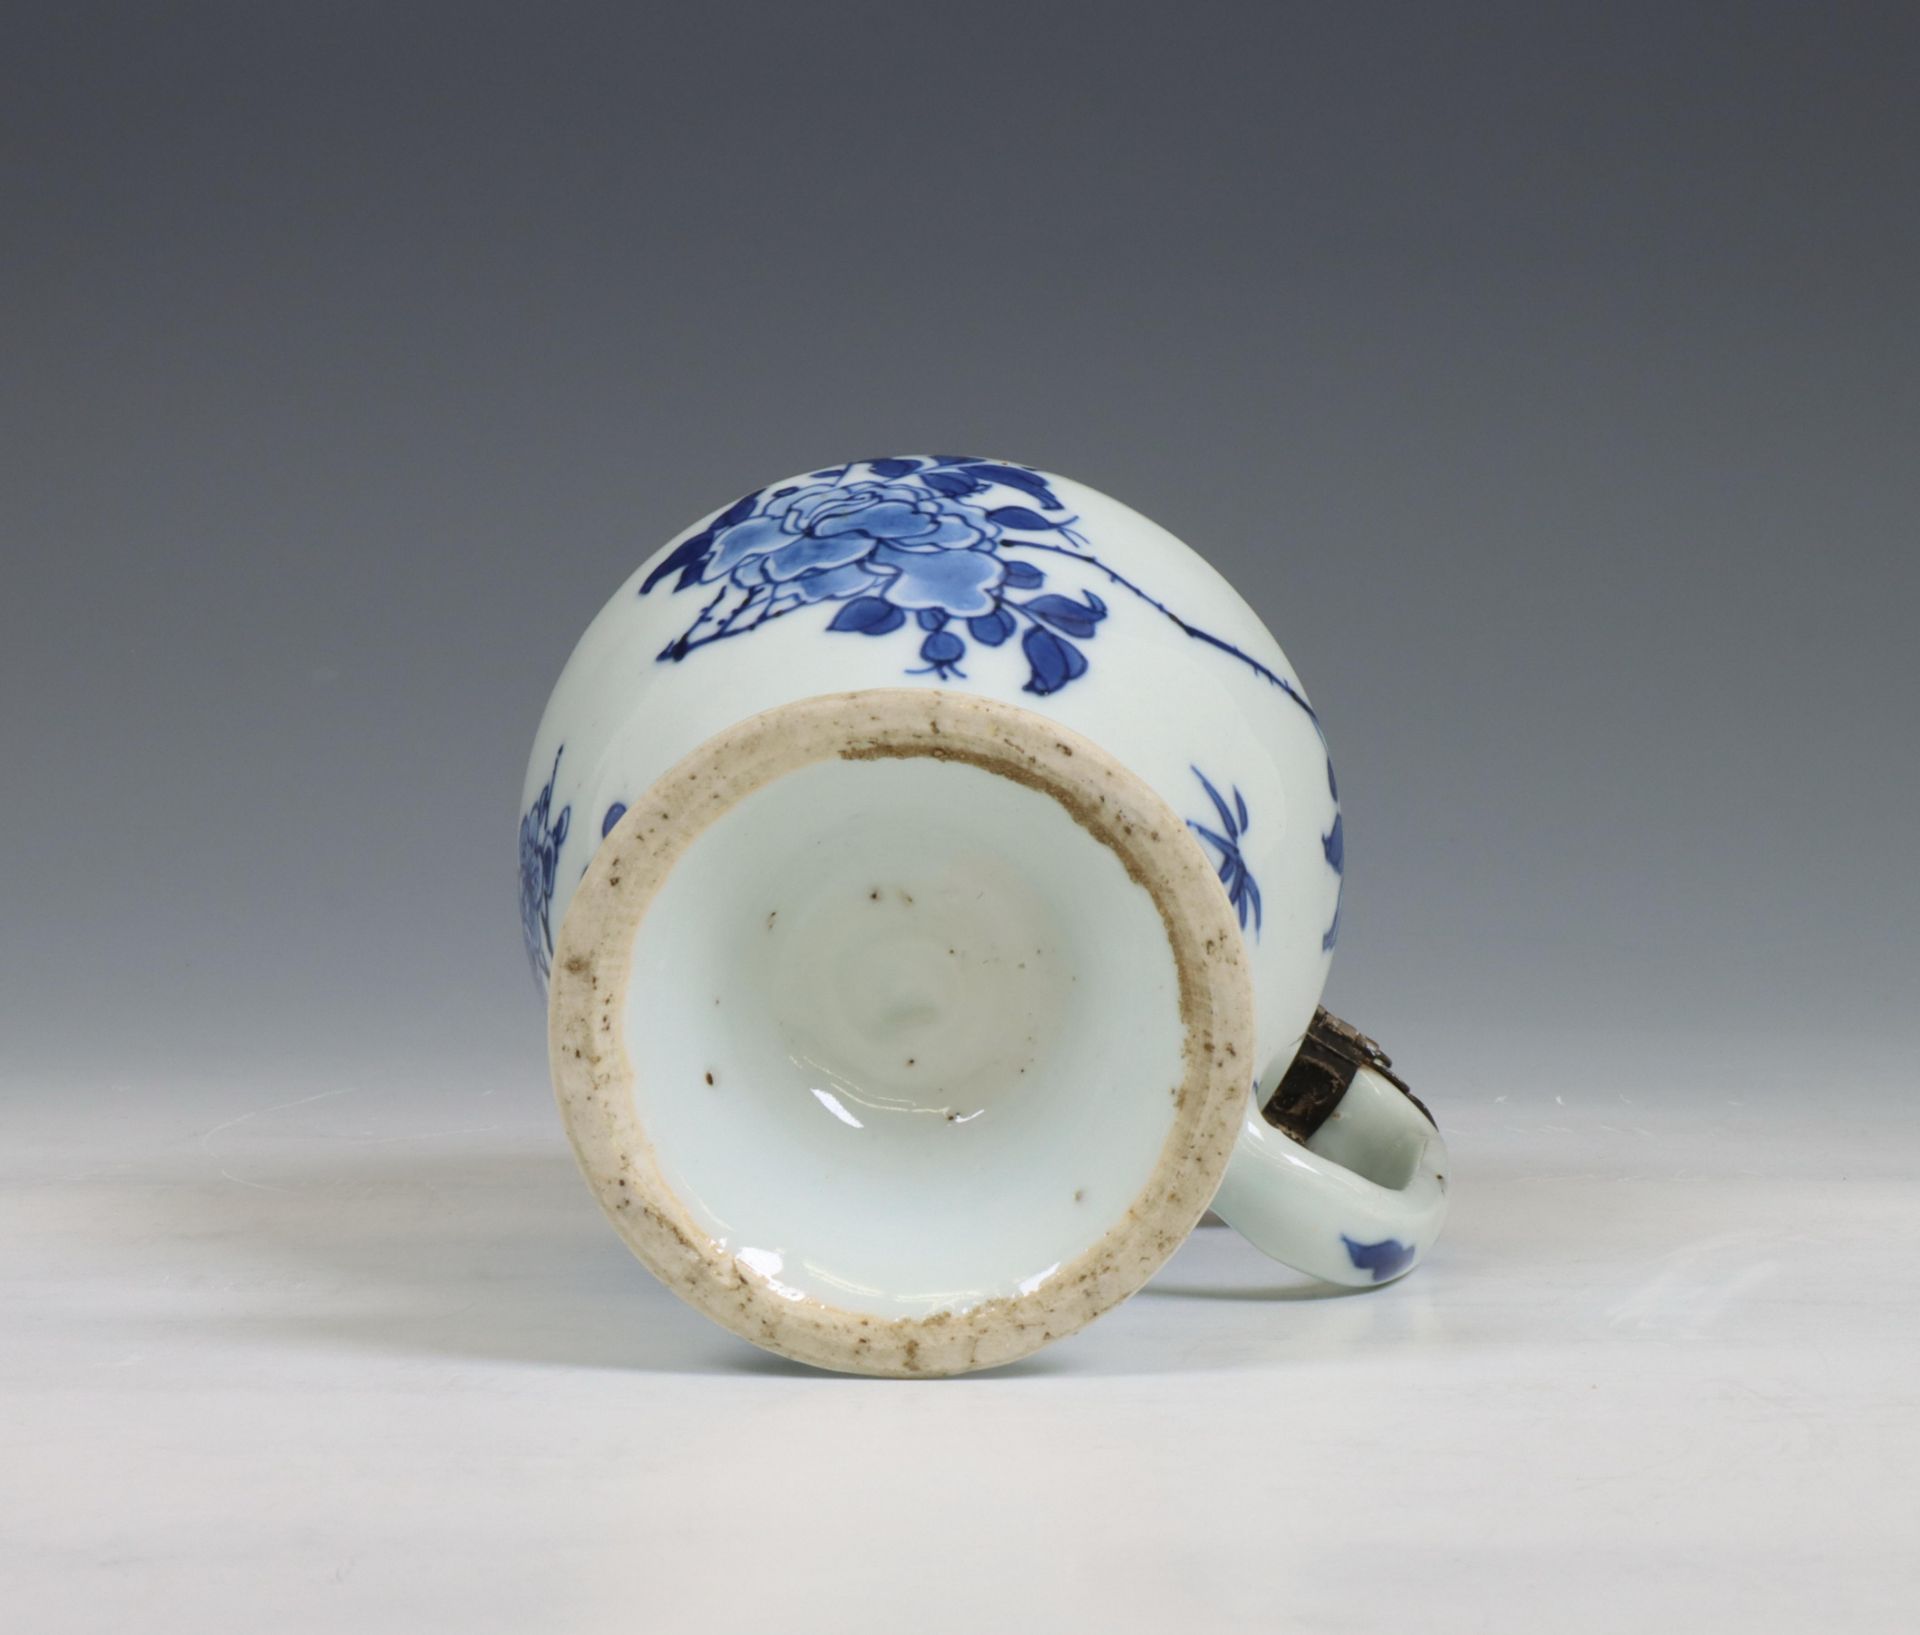 China, a Transitional silver-mounted blue and white mustard-pot and associated cover, mid 17th centu - Image 5 of 6